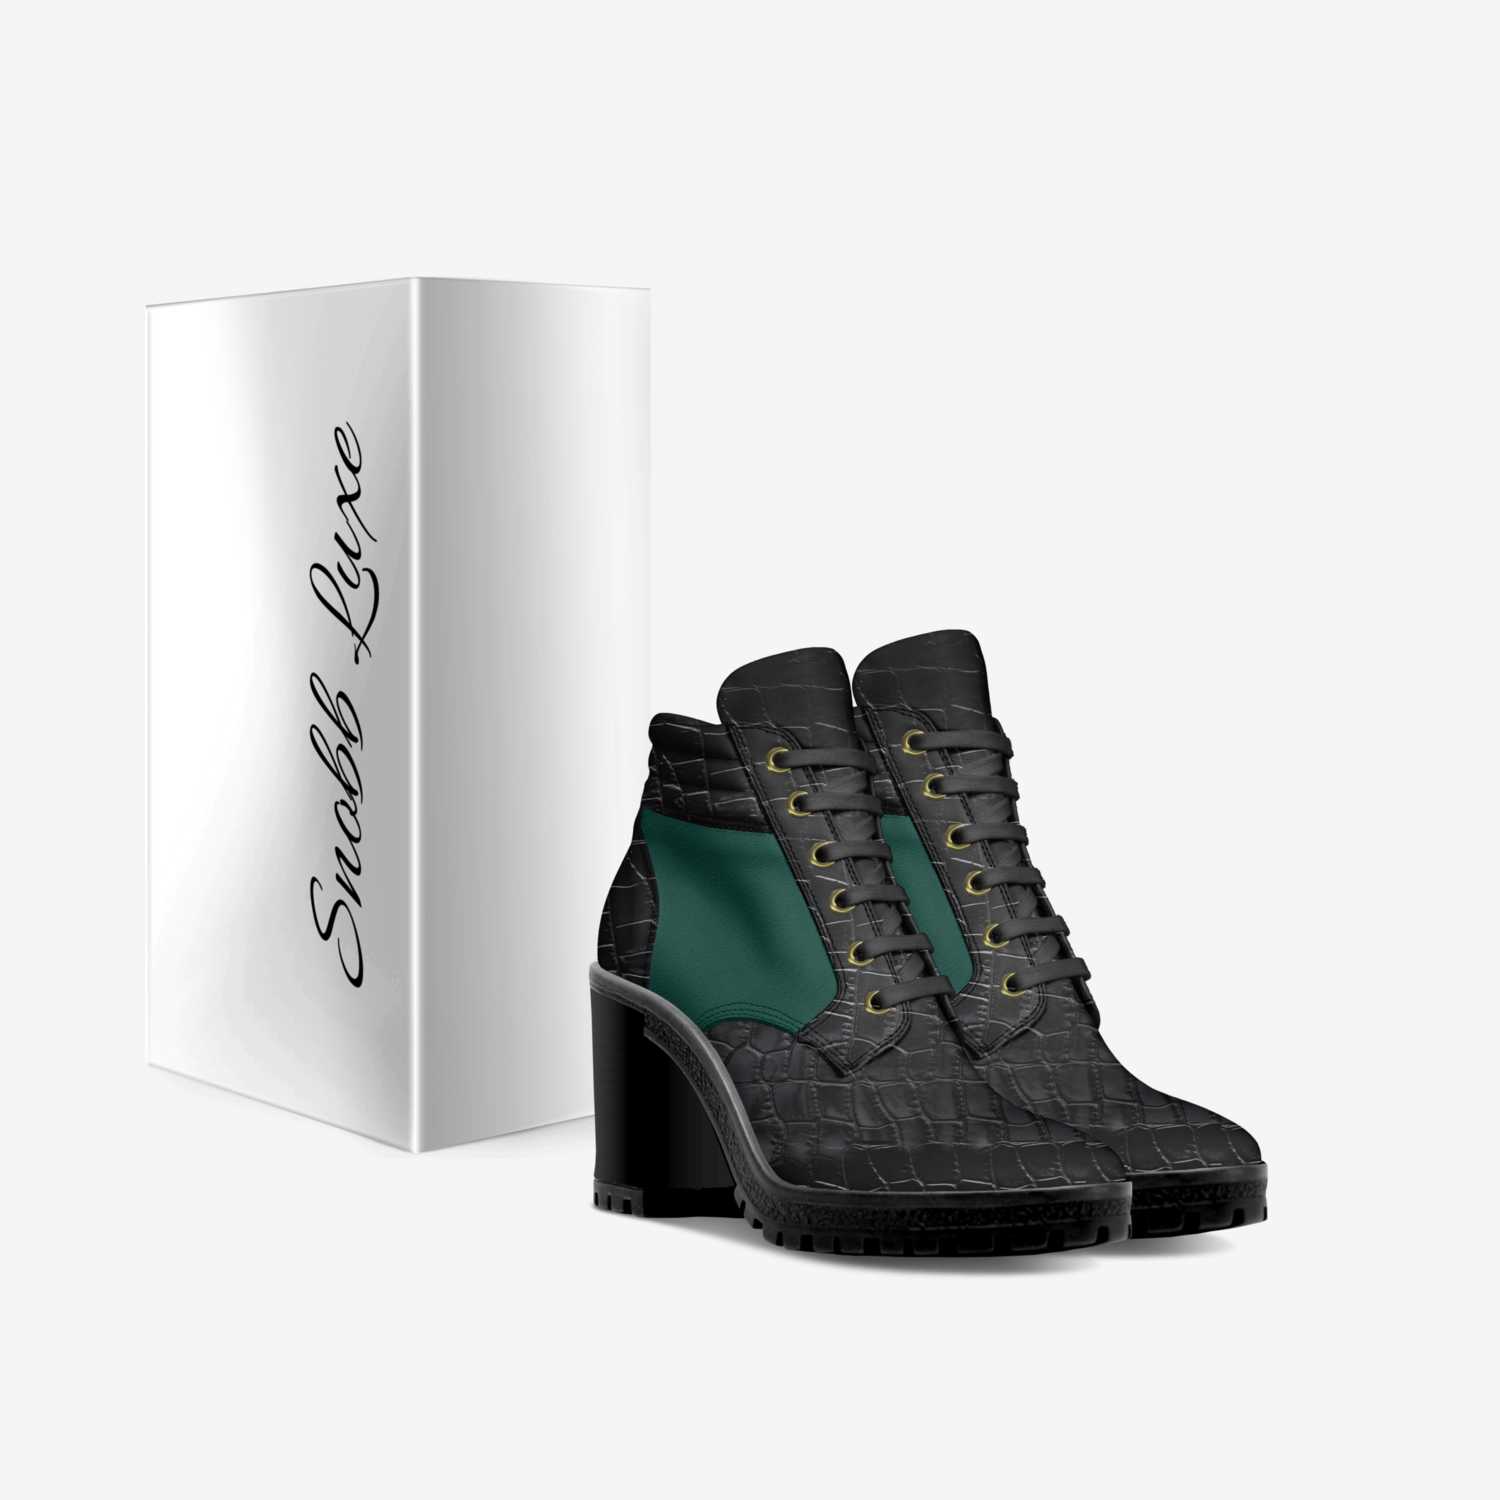 Snobb Luxe  custom made in Italy shoes by Samiyah Salih | Box view